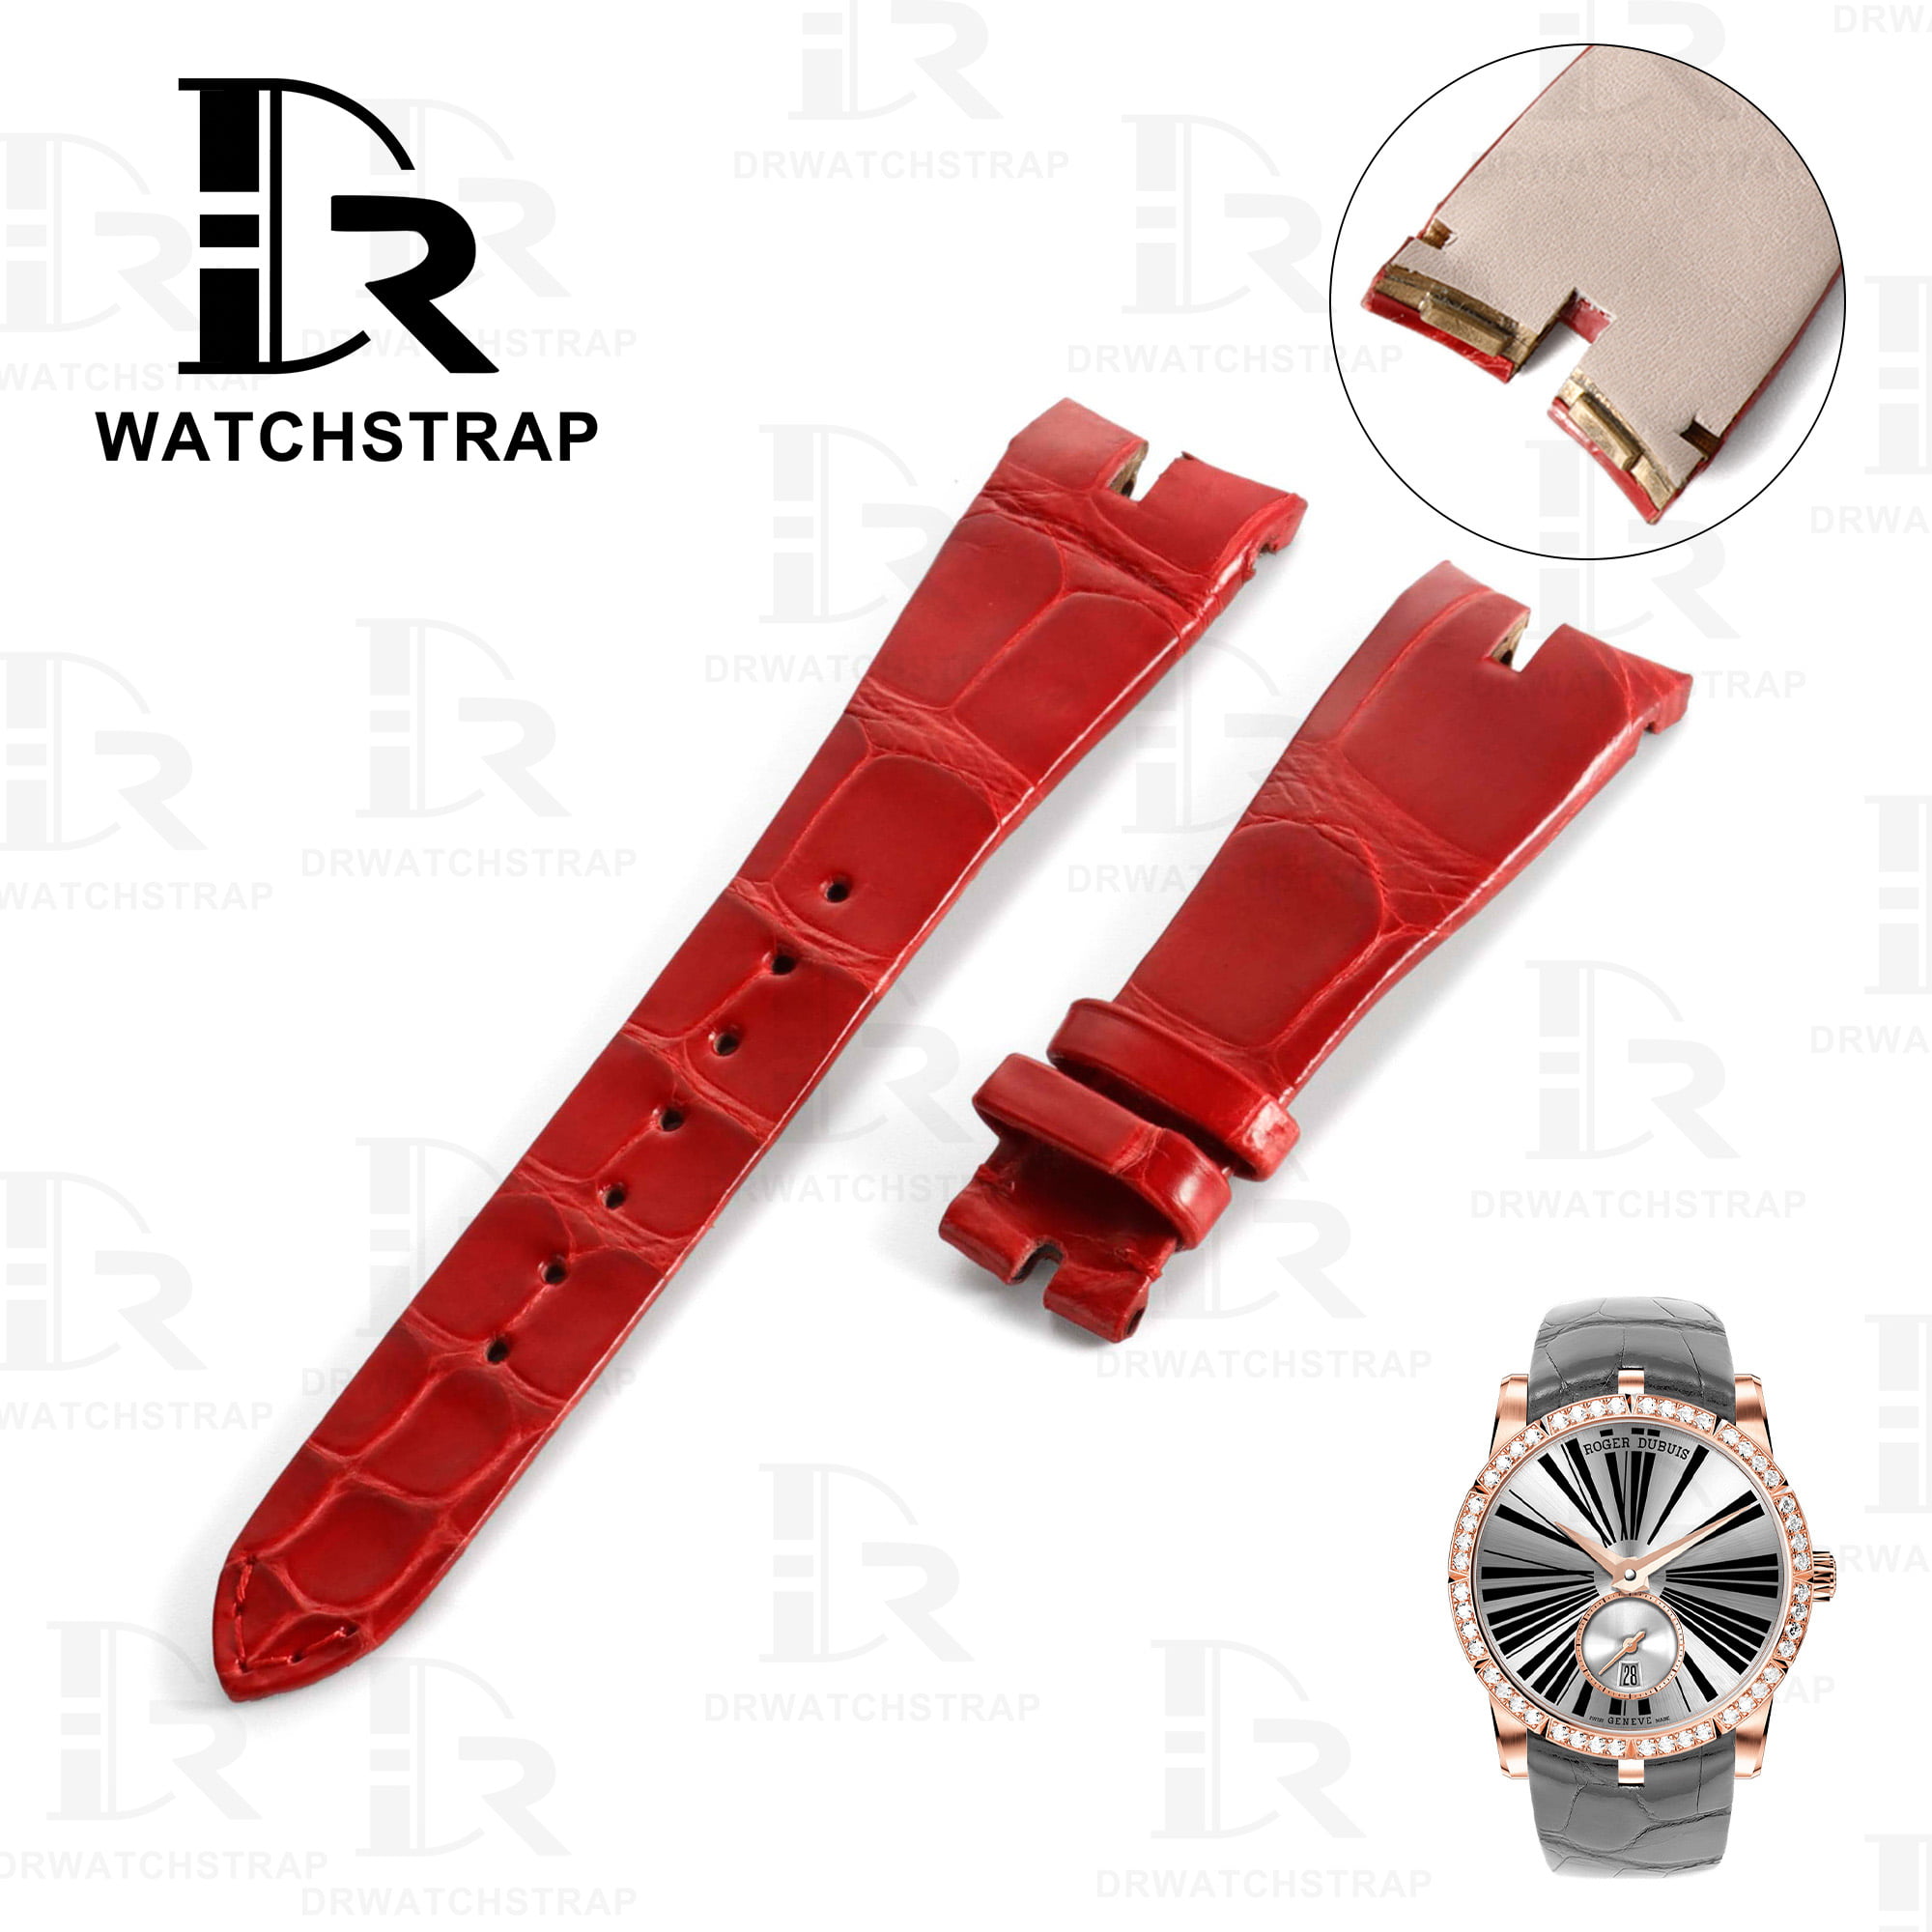 Best quality replacement Red leather alligator siamese red Roger Dubuis replacement straps and watch bands for Roger Dubuis Excalibur ladies' women's watches online for sale a (1)